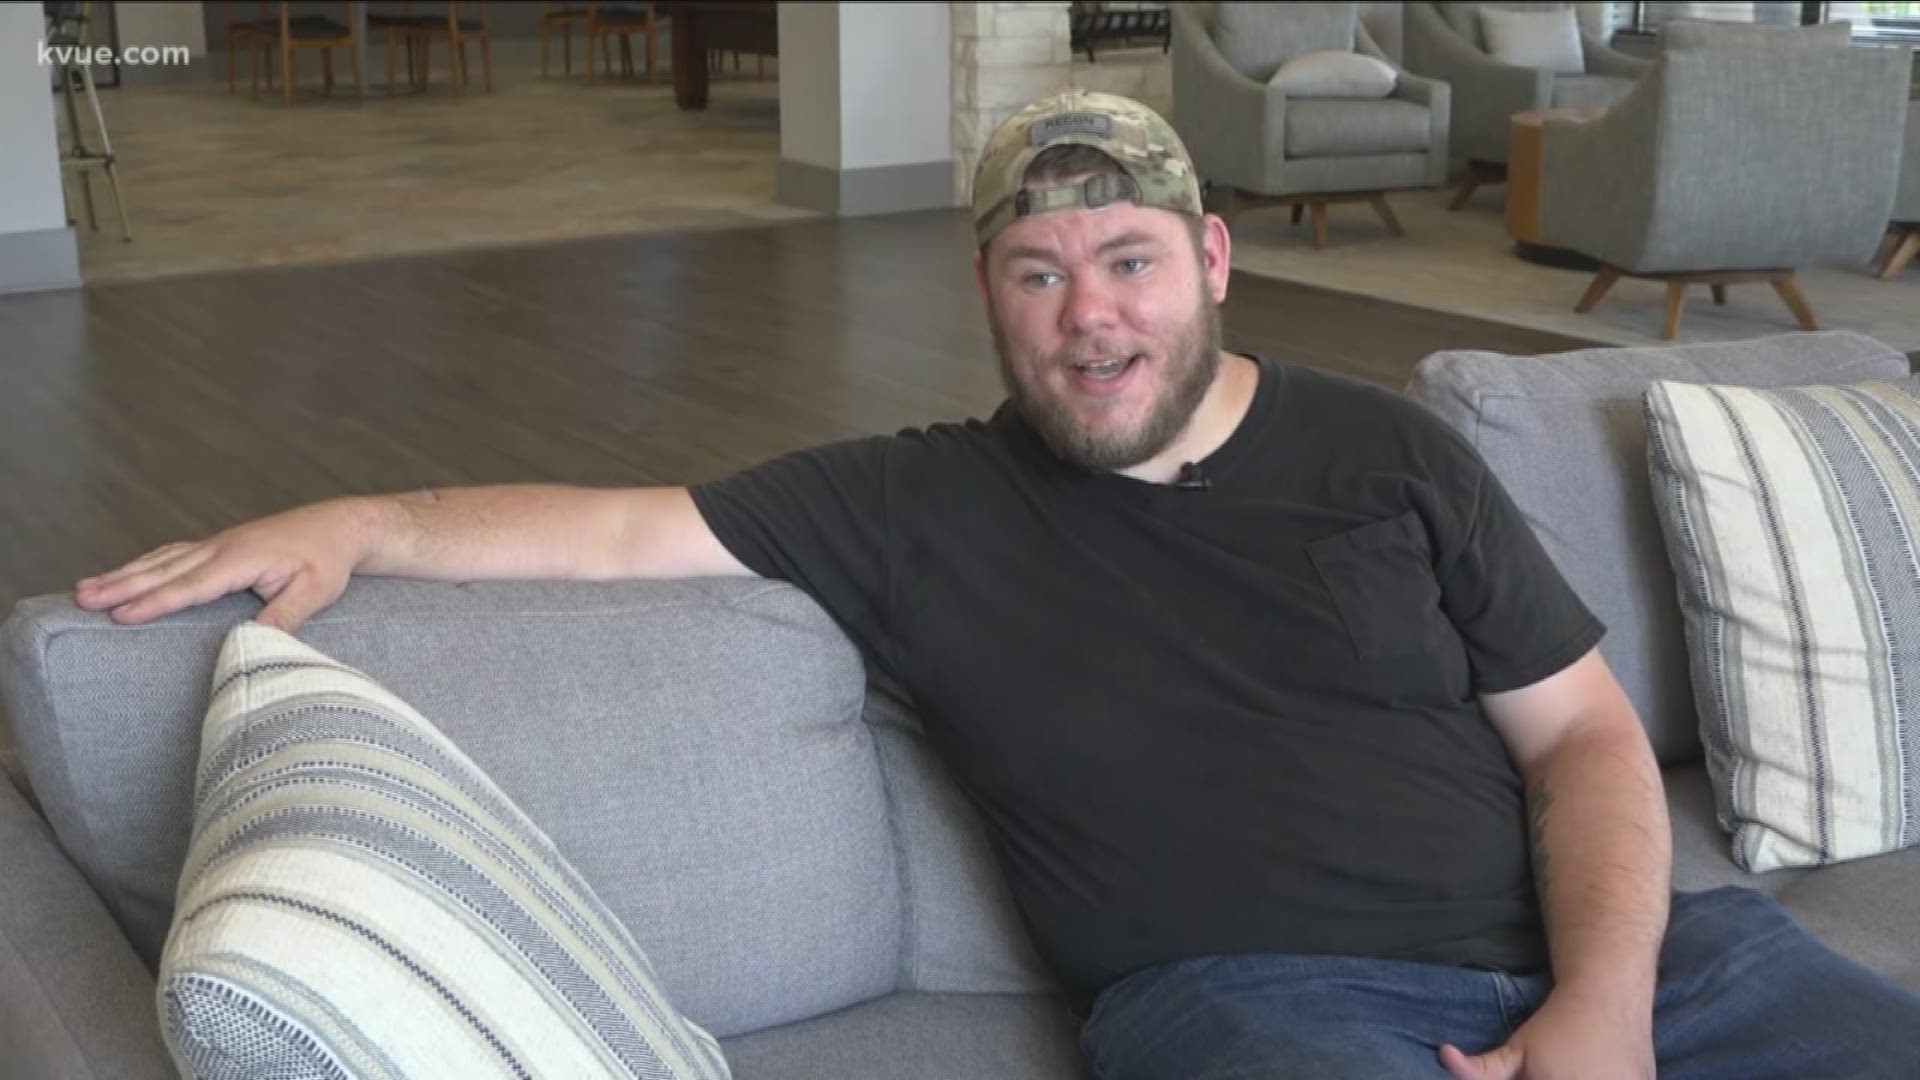 An Austin veteran ended up with cuts on his arms and stitches after allegedly being attacked by a homeless man he says he was trying to help.